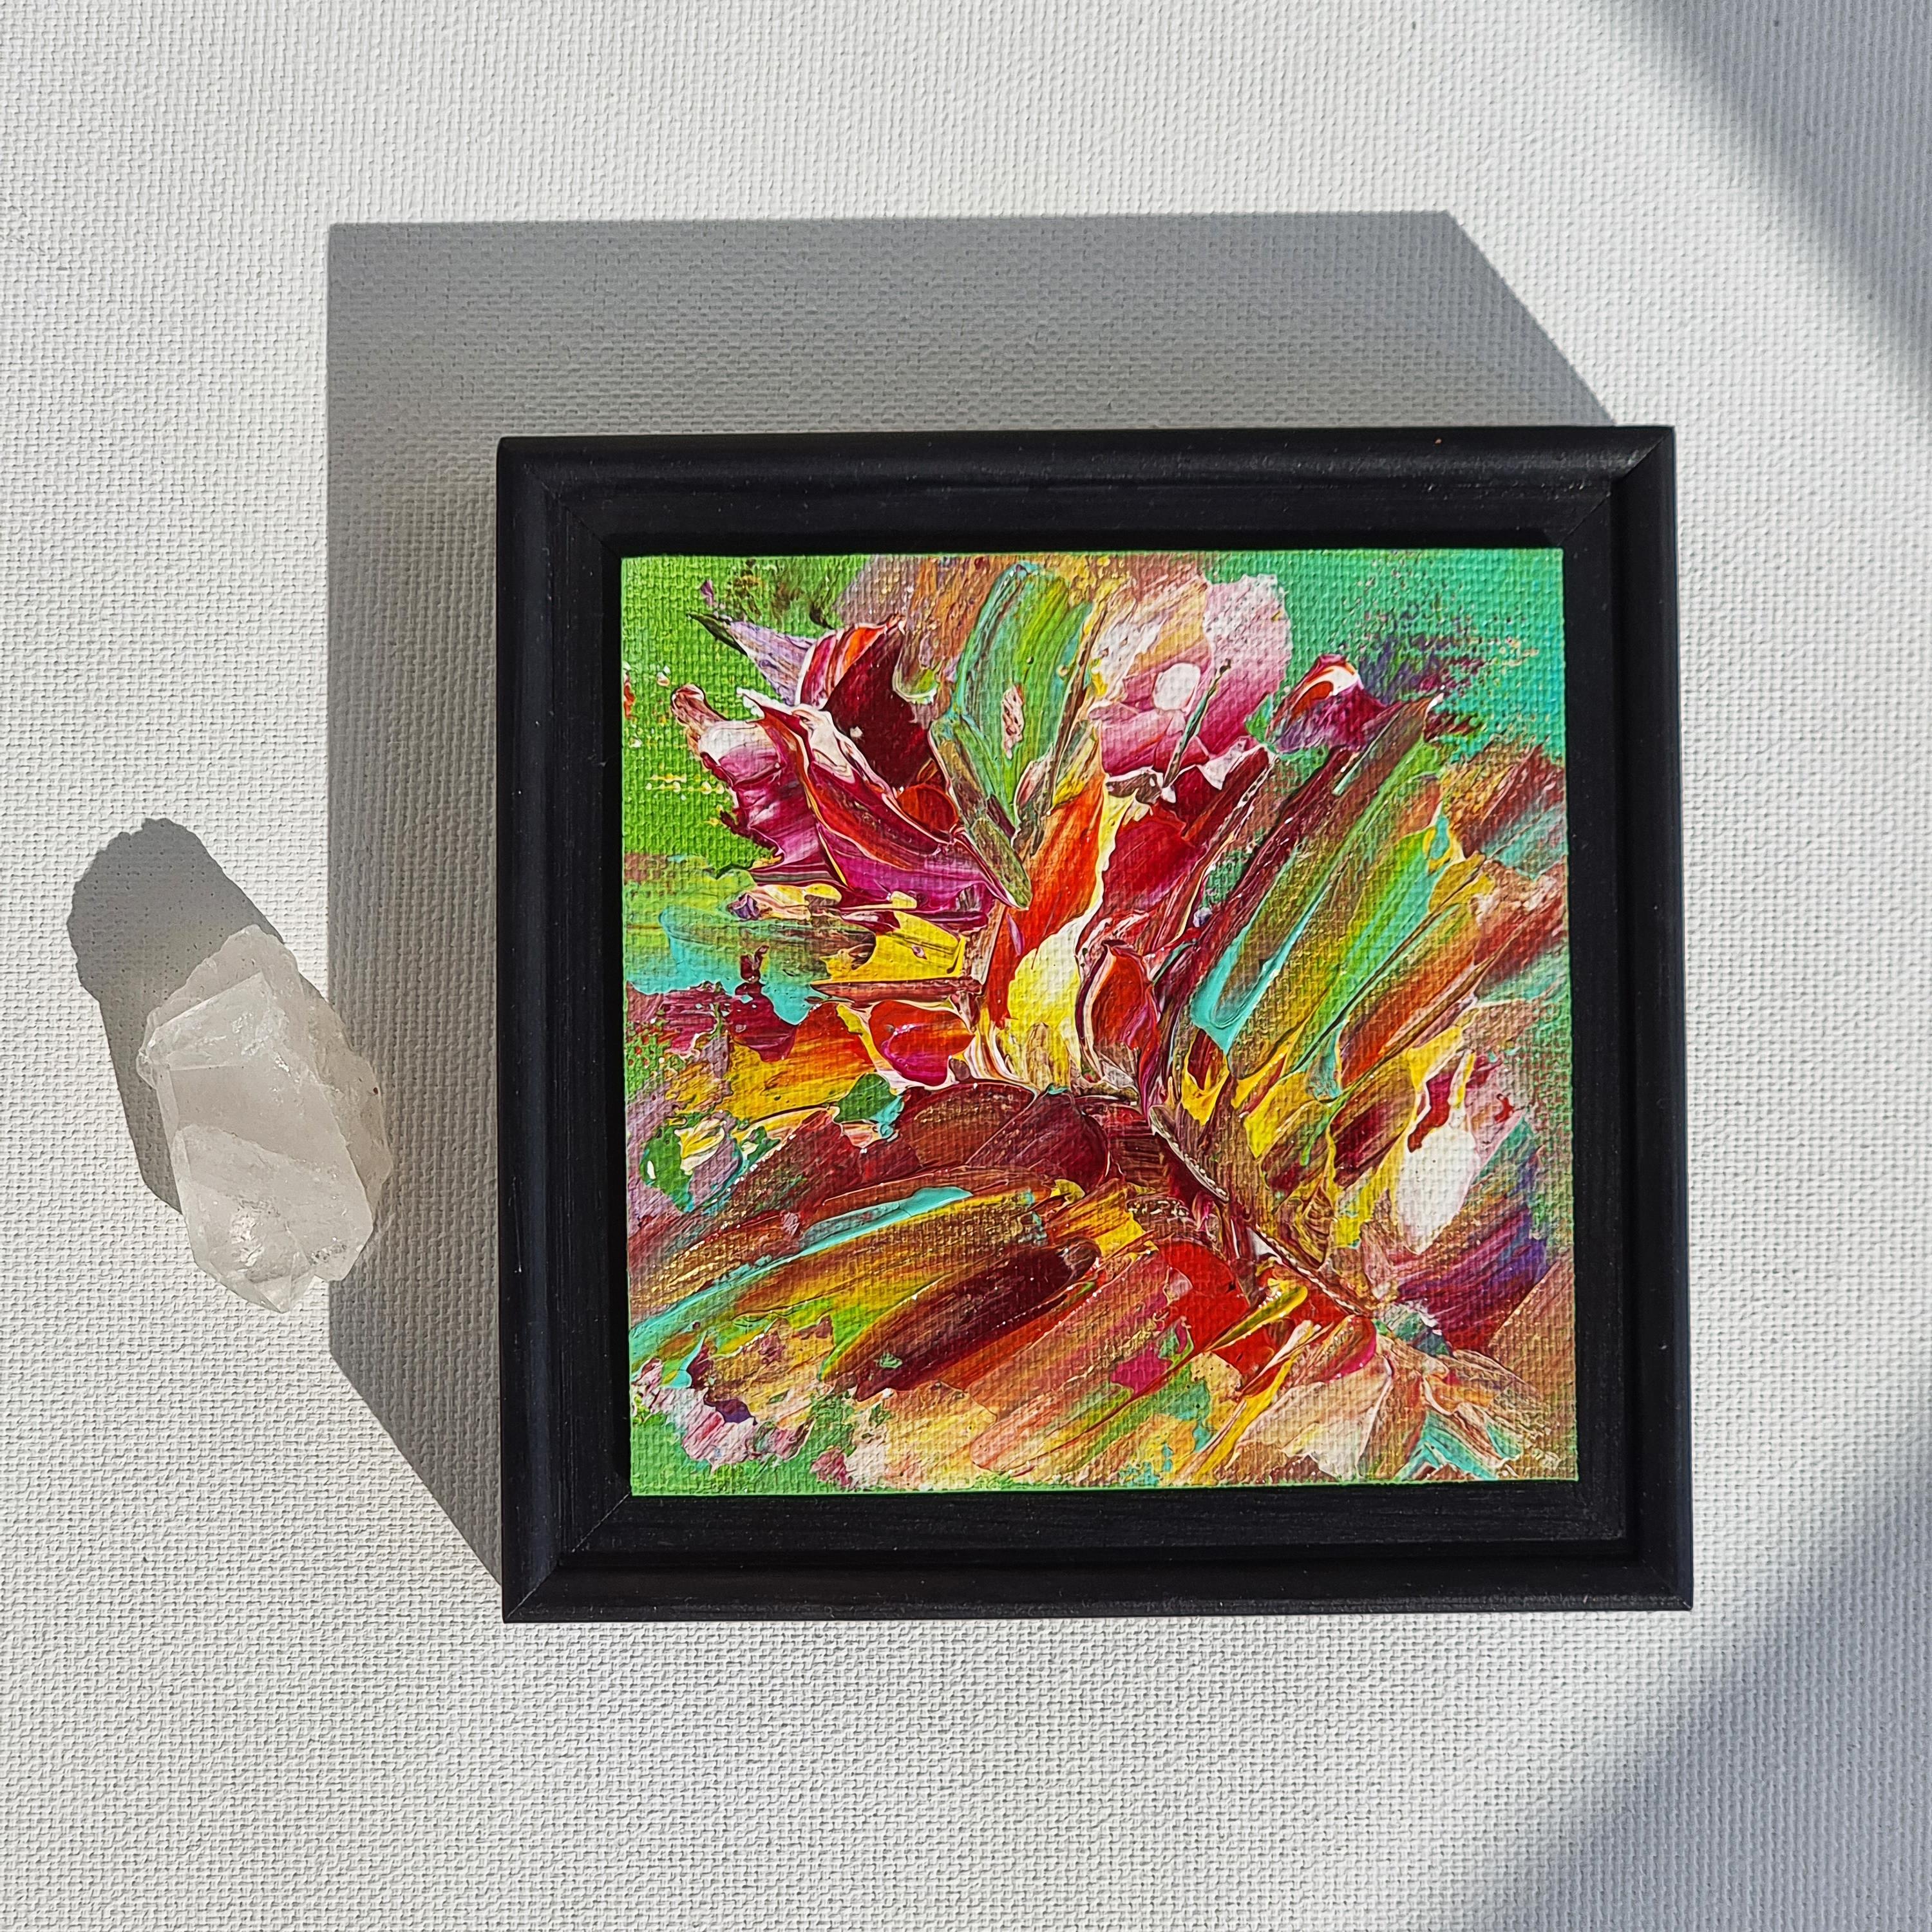 My new series for gift- mini abstractions with wooden frame. Bright, colorful minis with strong energy will be a great gift idea for yourself or some special people. You can just put them on a table or hand on the wall.
It will suit any contemporary